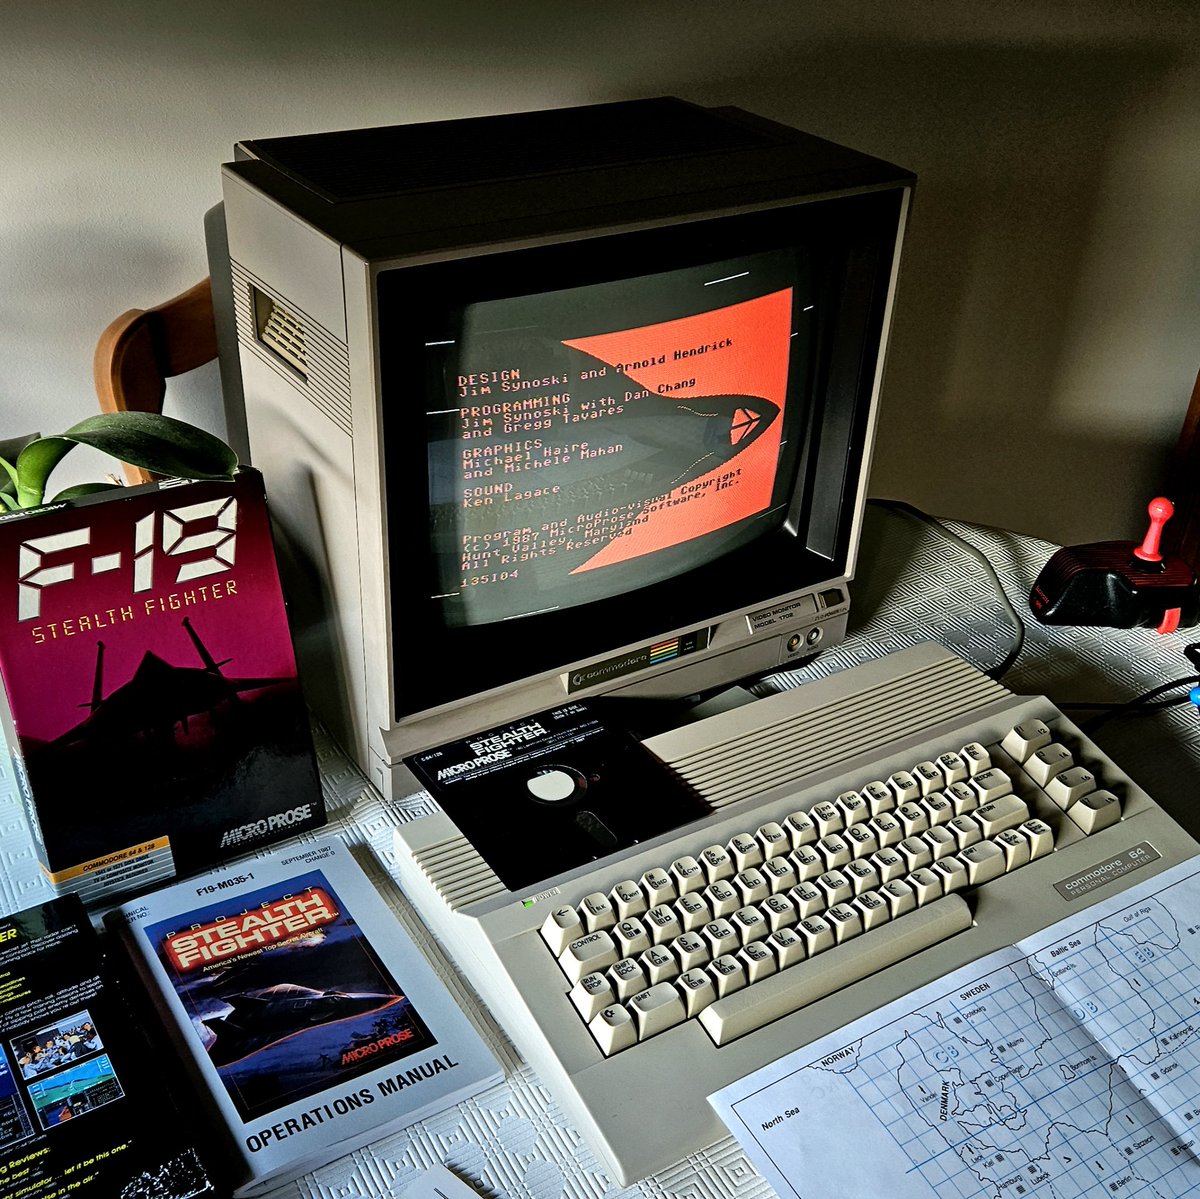 Another shot from F-19 Project Stealth Fighter on the Commodore 64. The lack of external views is definitely a drawback but it's compensated by great sound effects, arguably better than with a PC sound card, not to mention the speaker I used to listen to for hours back in the day